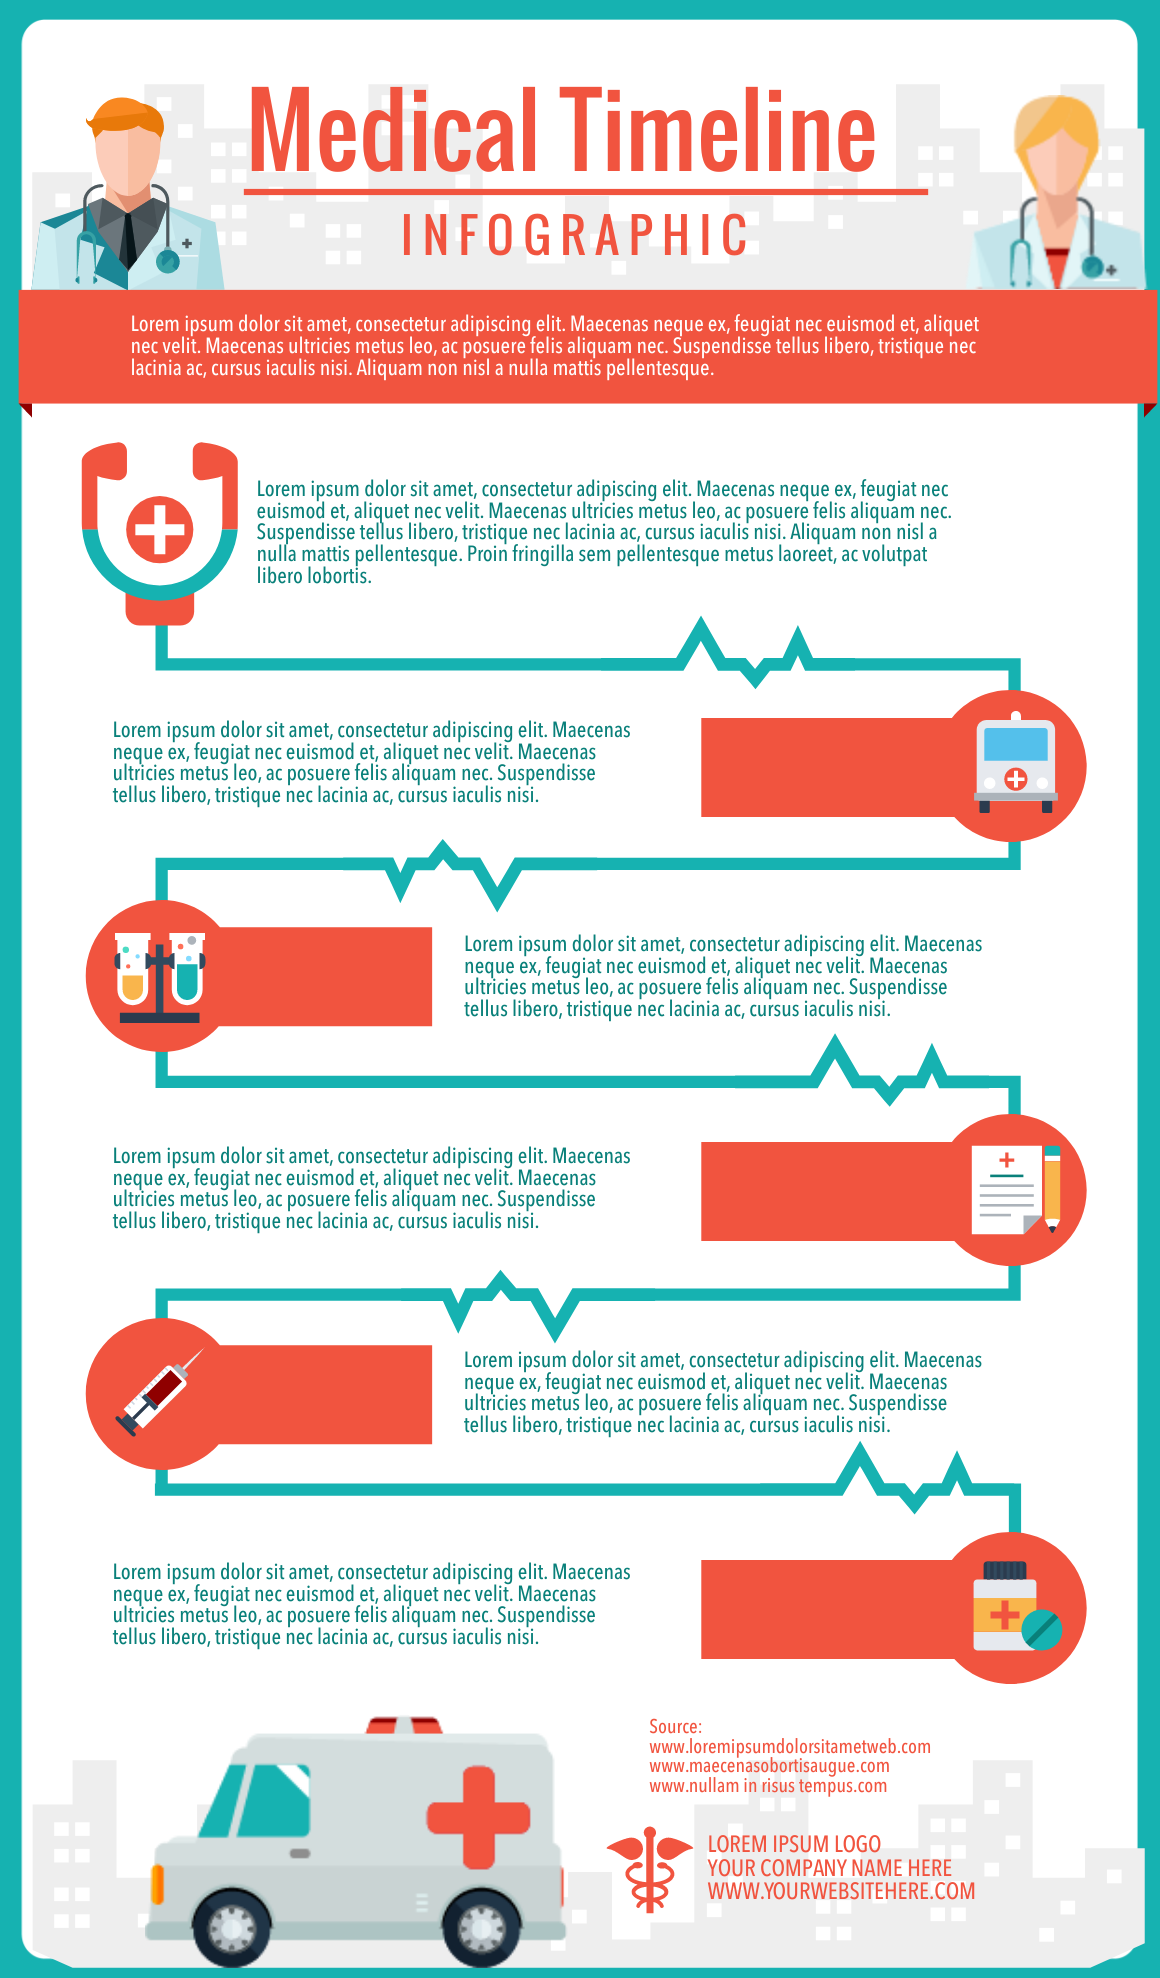 HighQuality Healthcare Infographic Templates You Can Customize Quickly